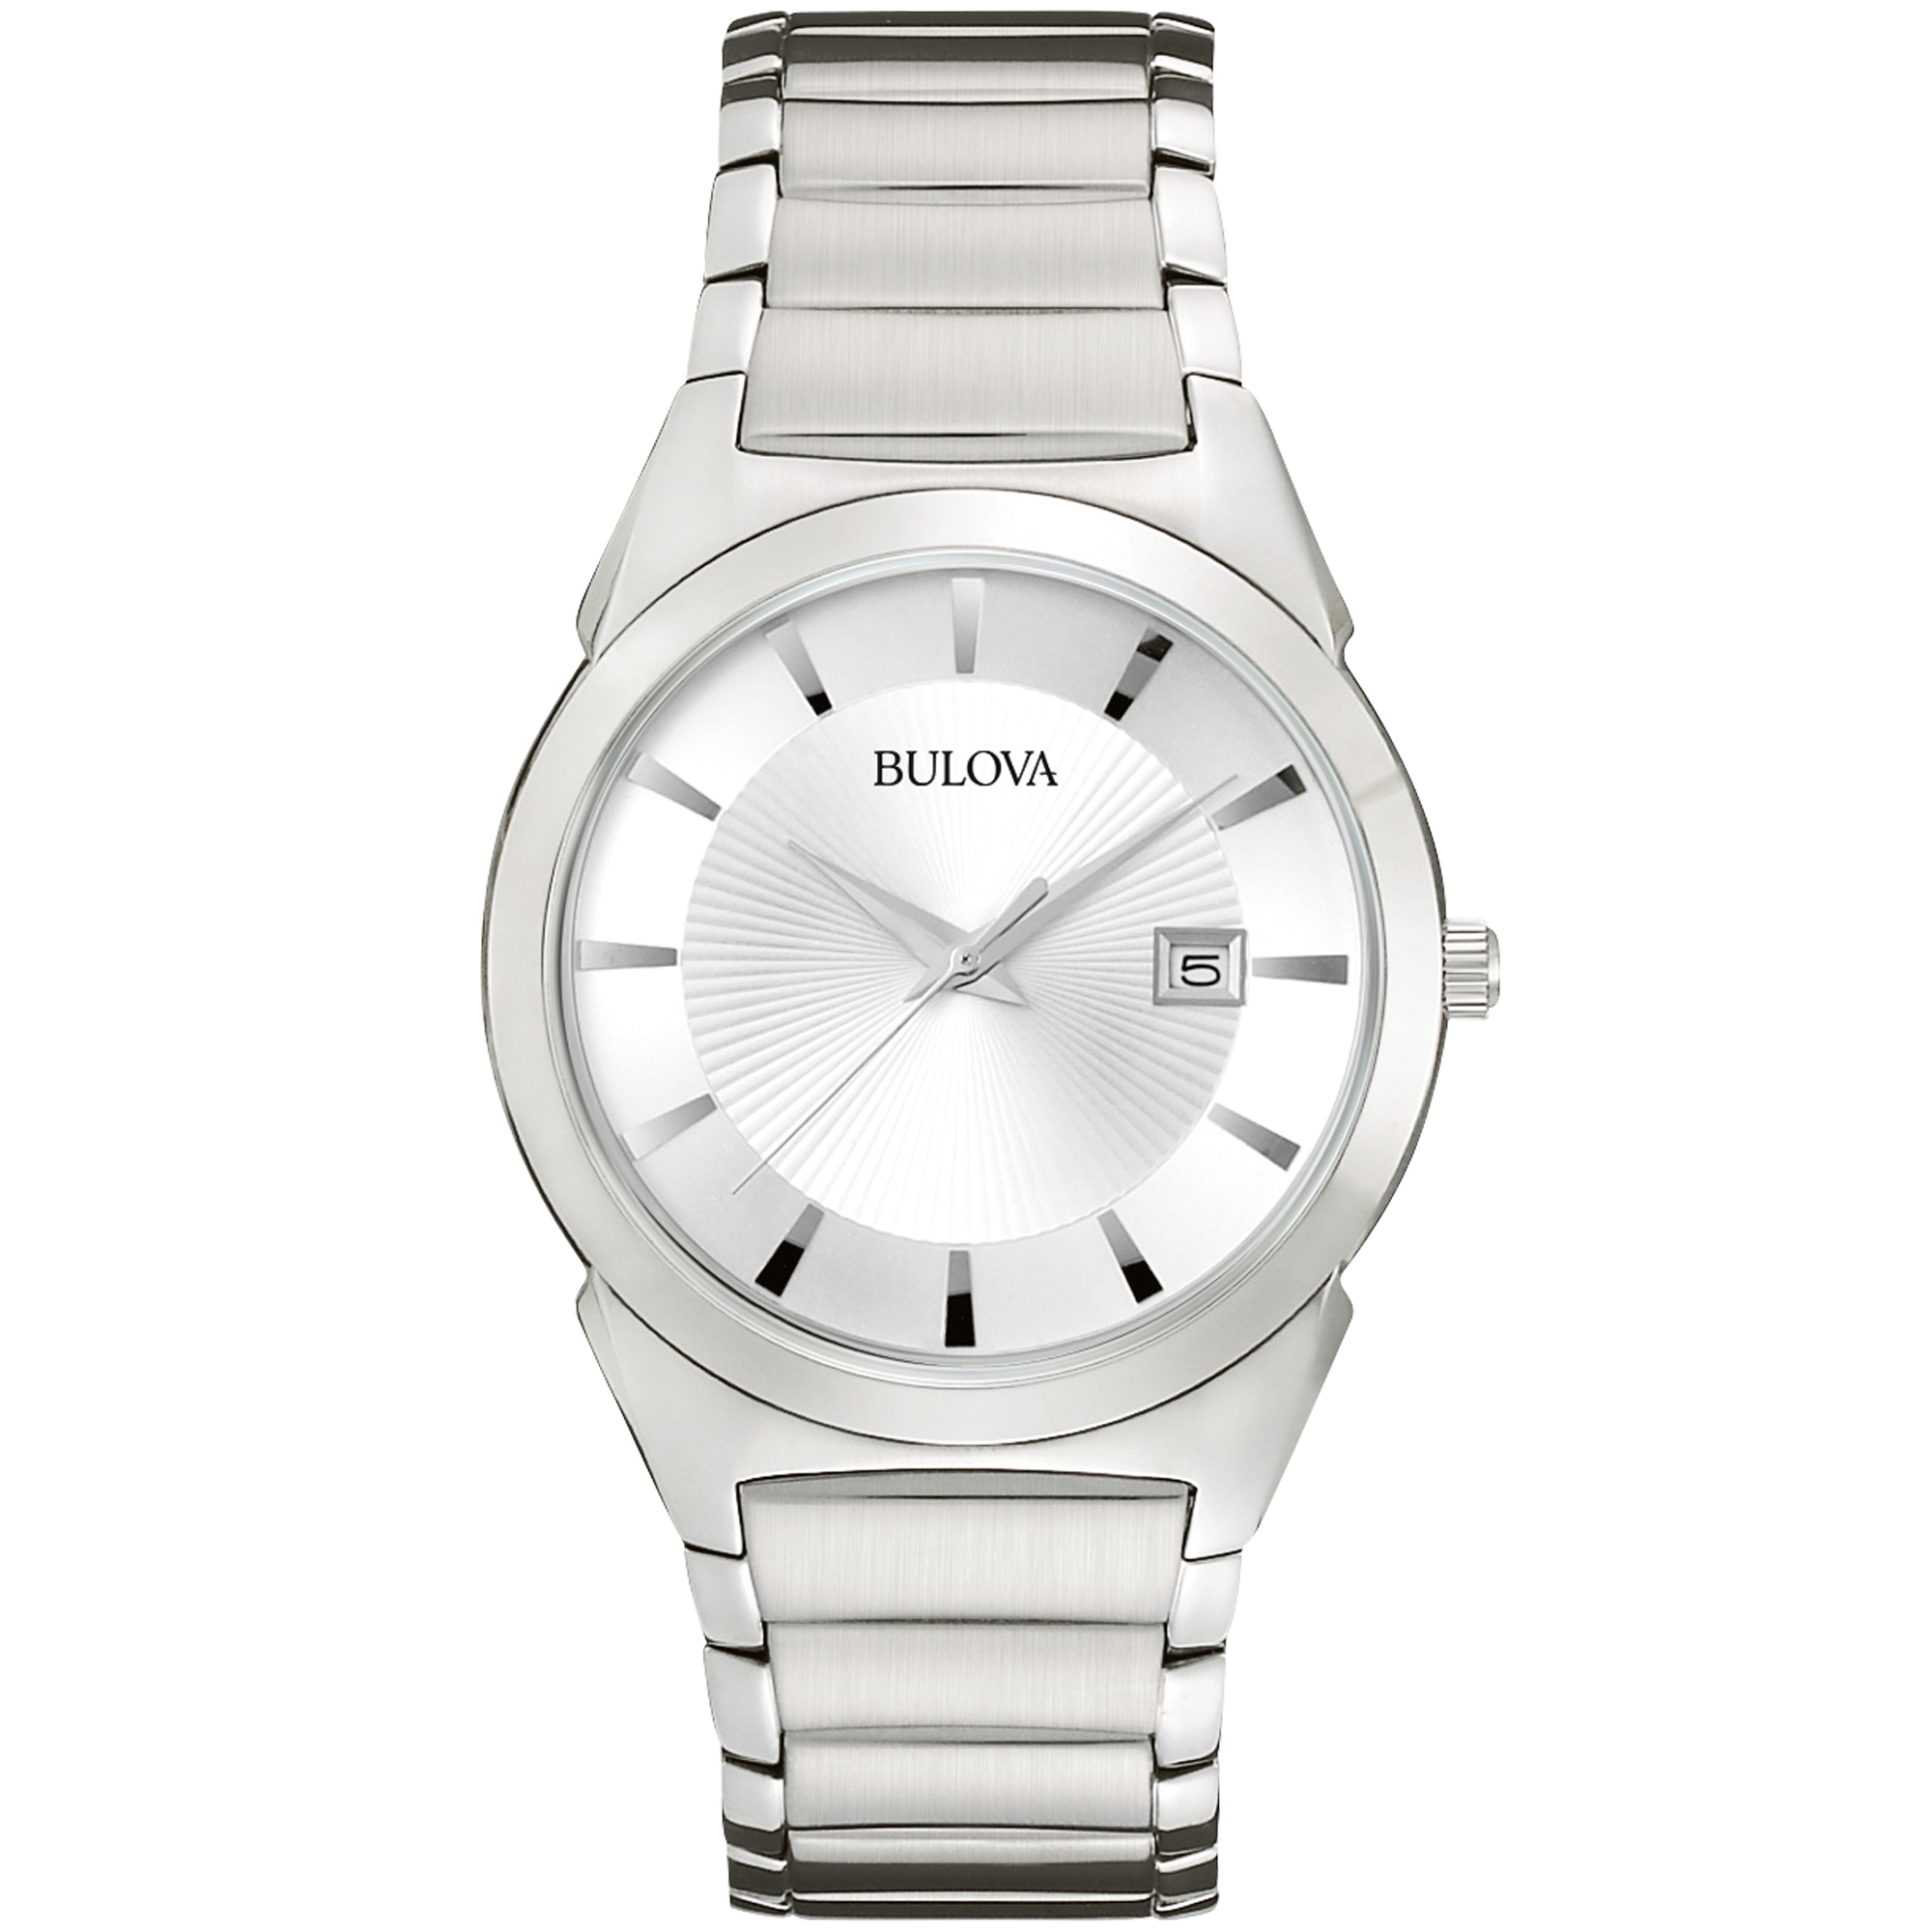 Bulova Mens Calendar Date Watch w/Silver Round Dial, Domed Crystal & ST Link Band